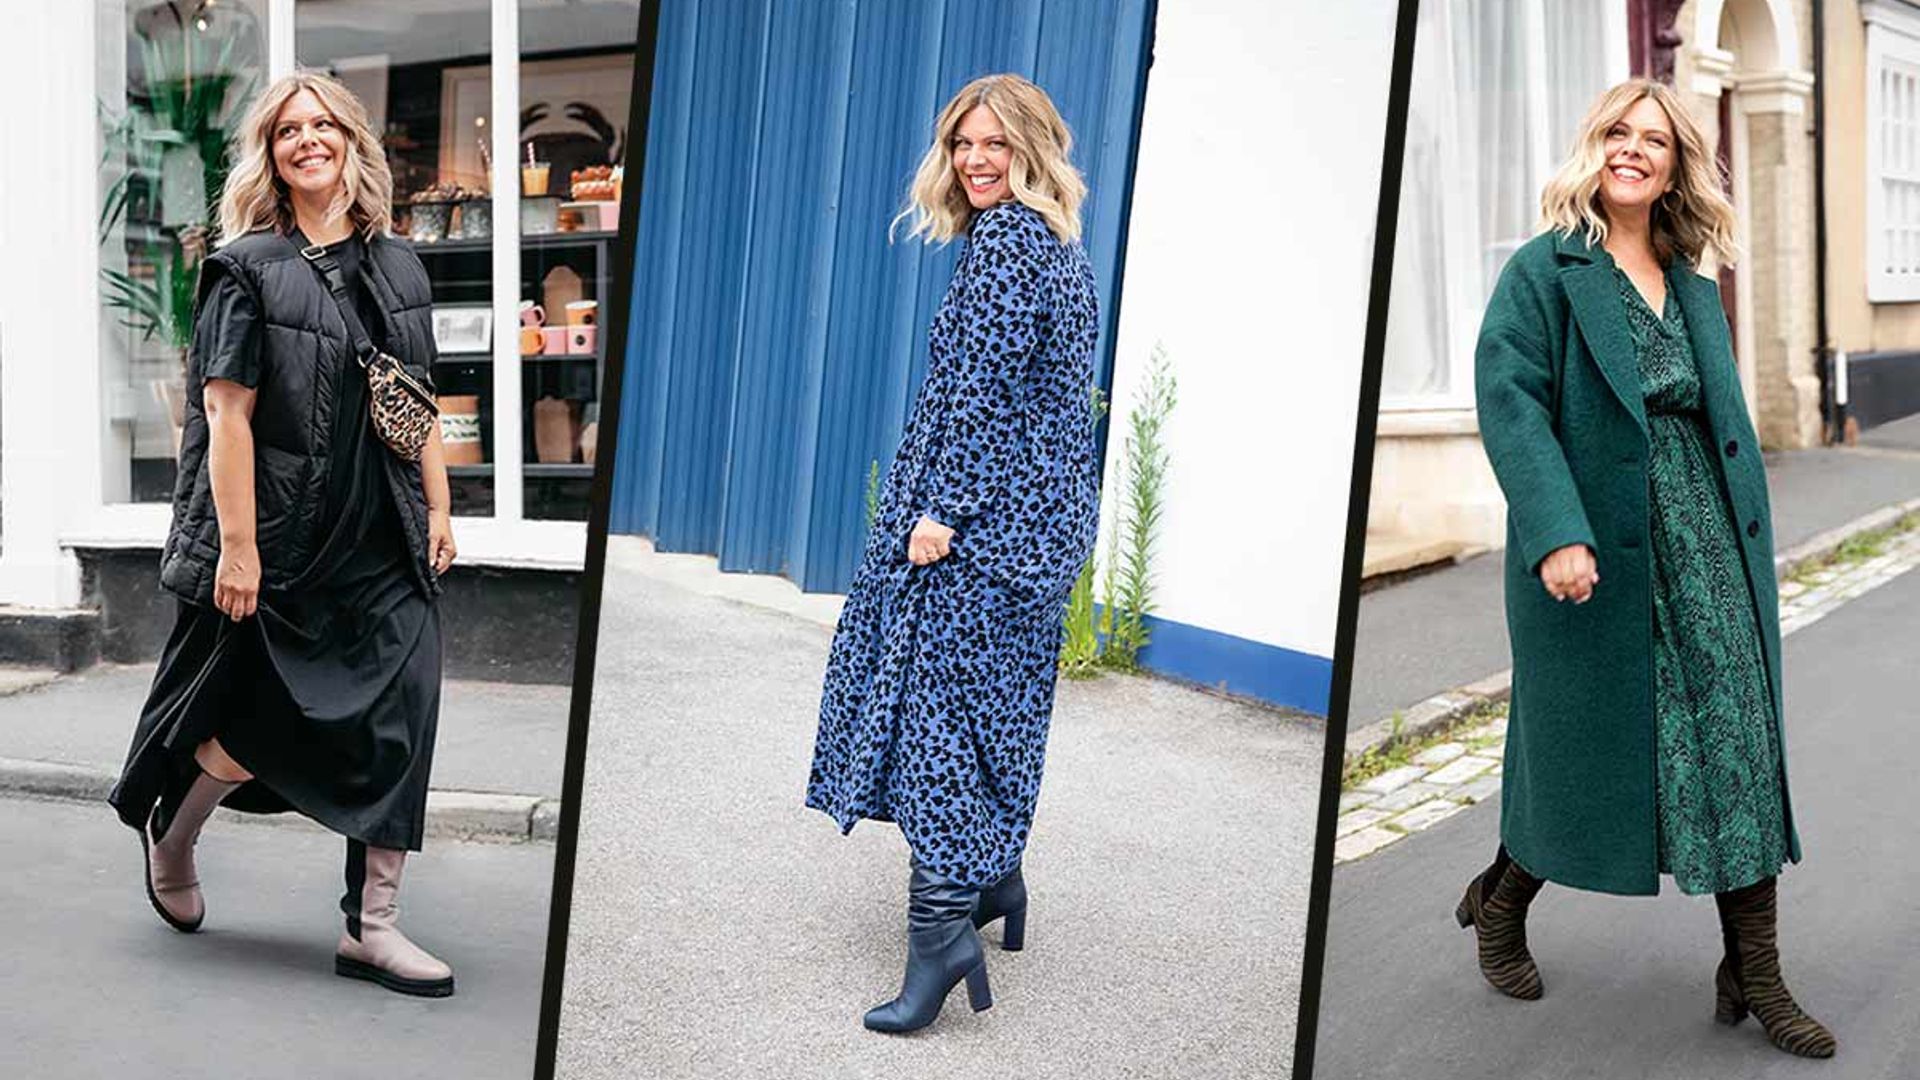 John Lewis launches new wider-calf boot collection with fashion influencer Erica Davies - all the details